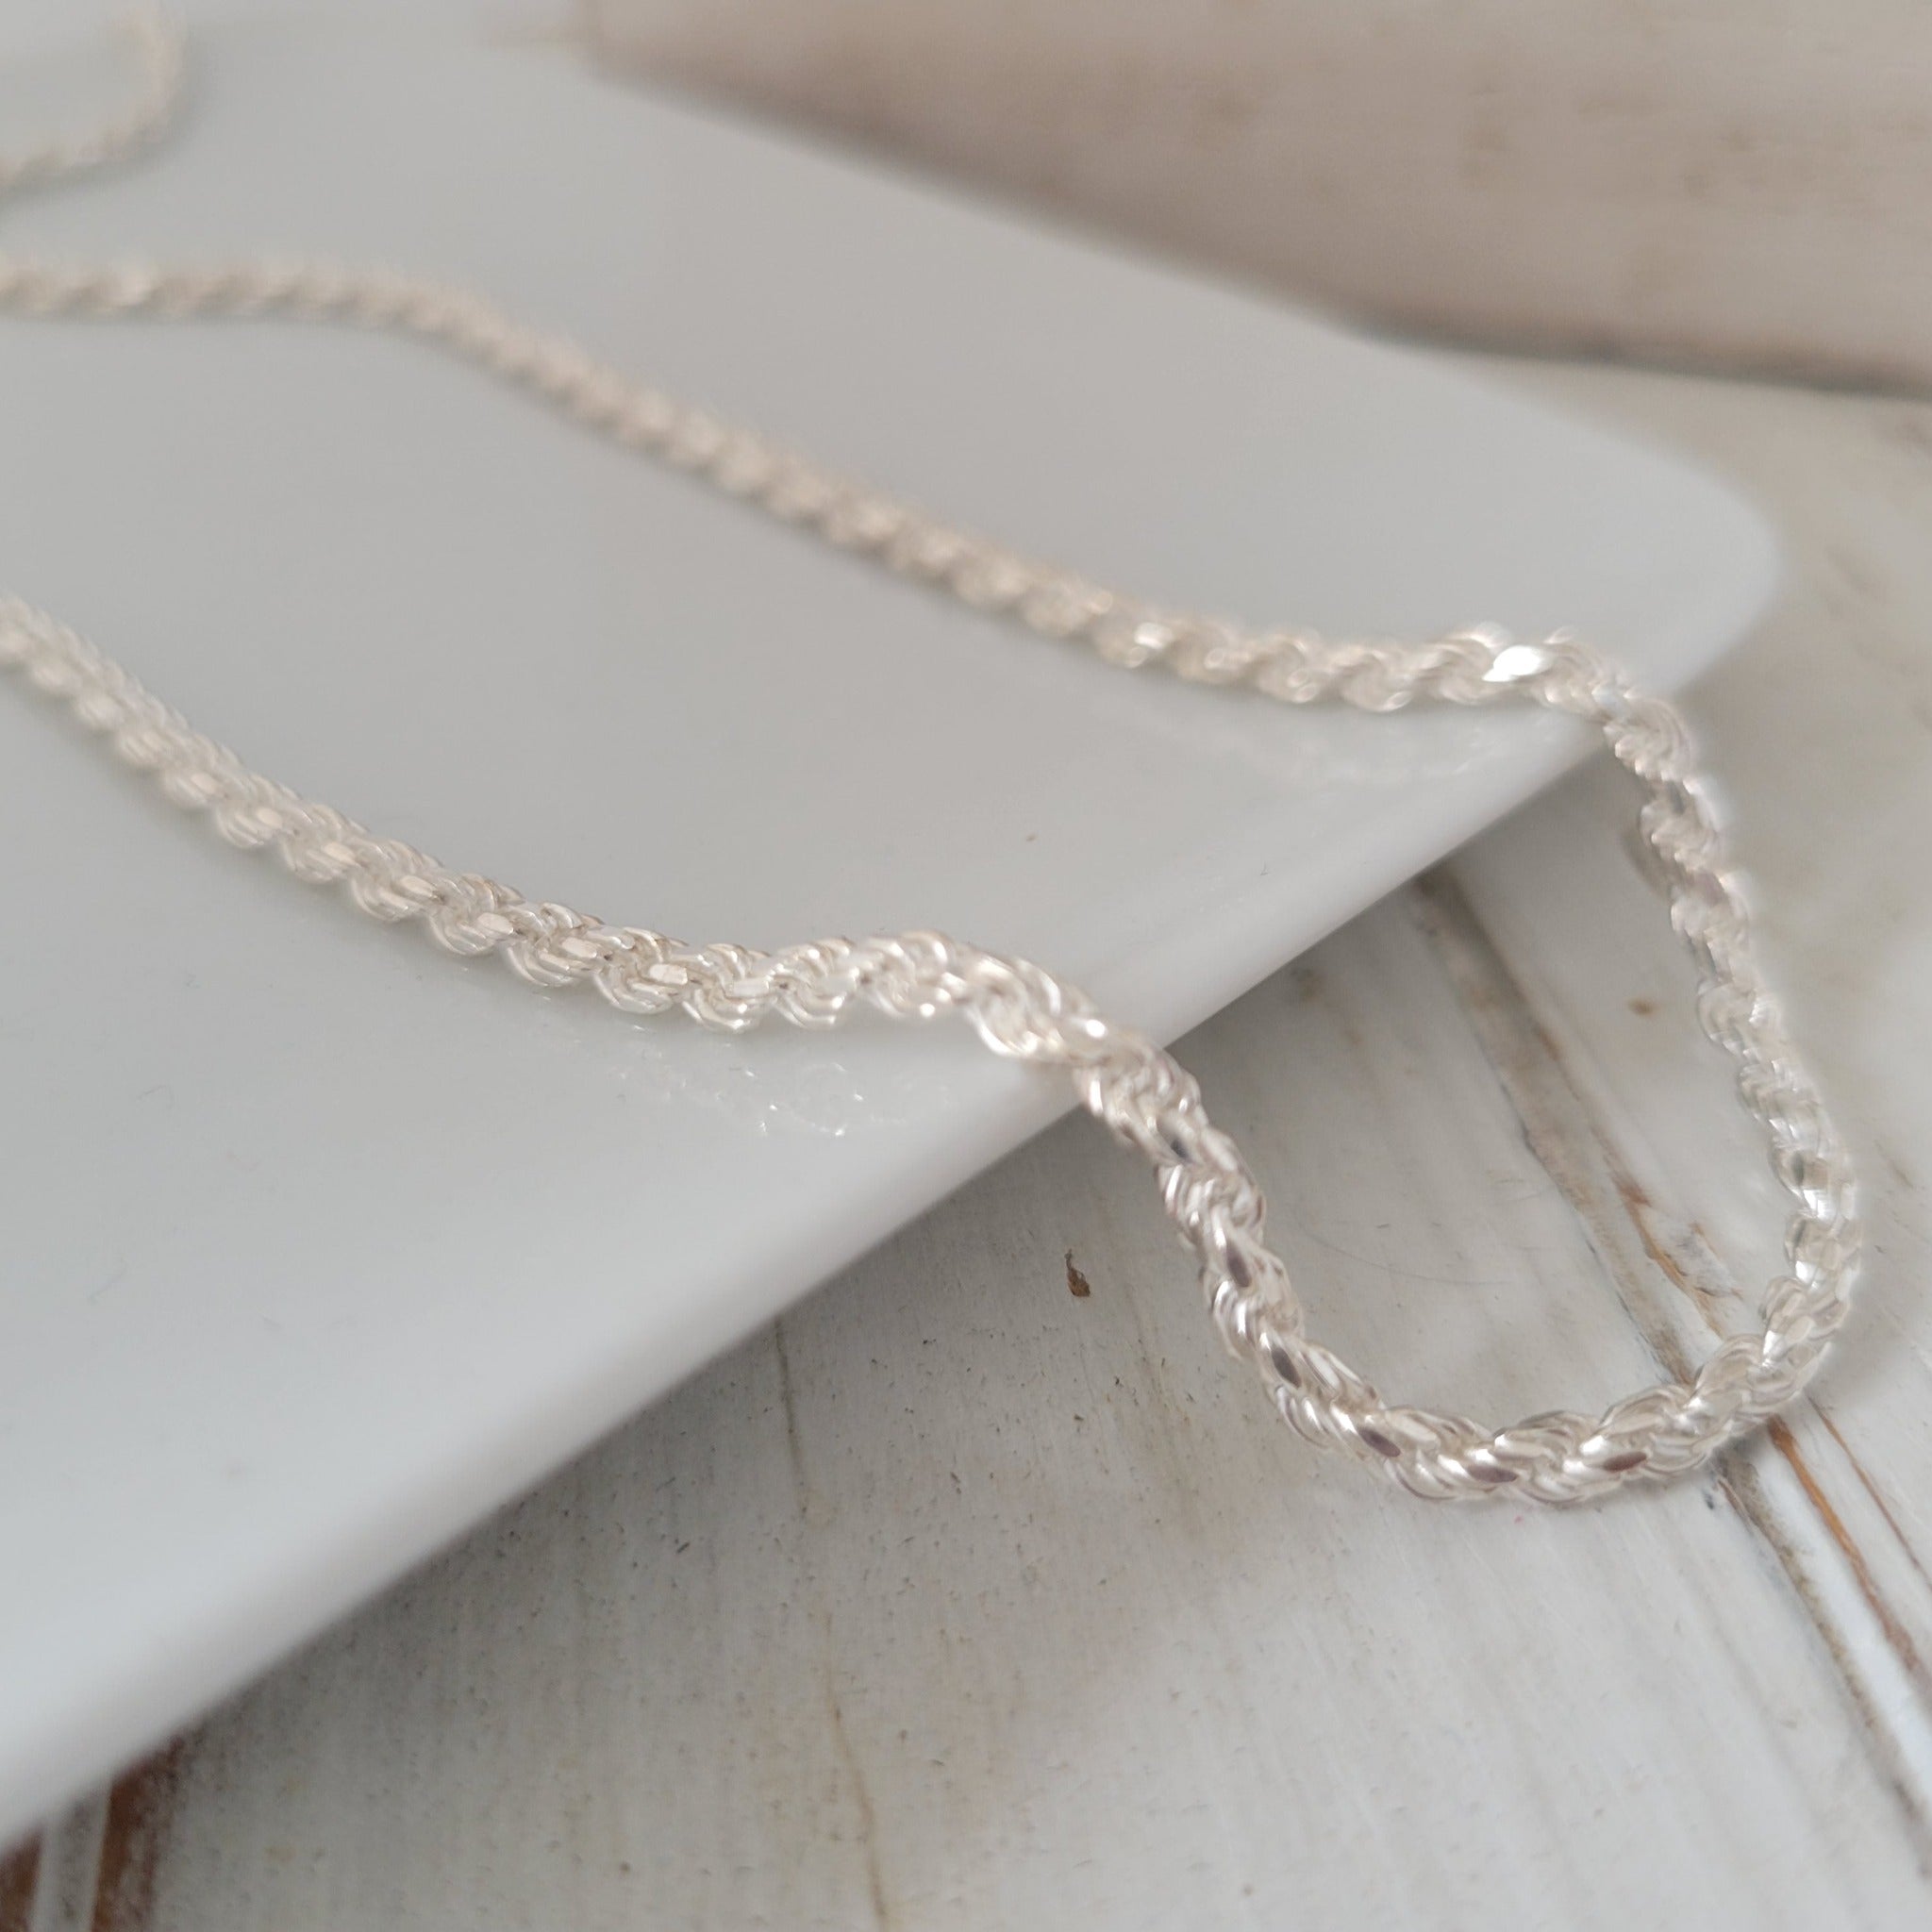 Pandora Thick Cable Chain Necklace